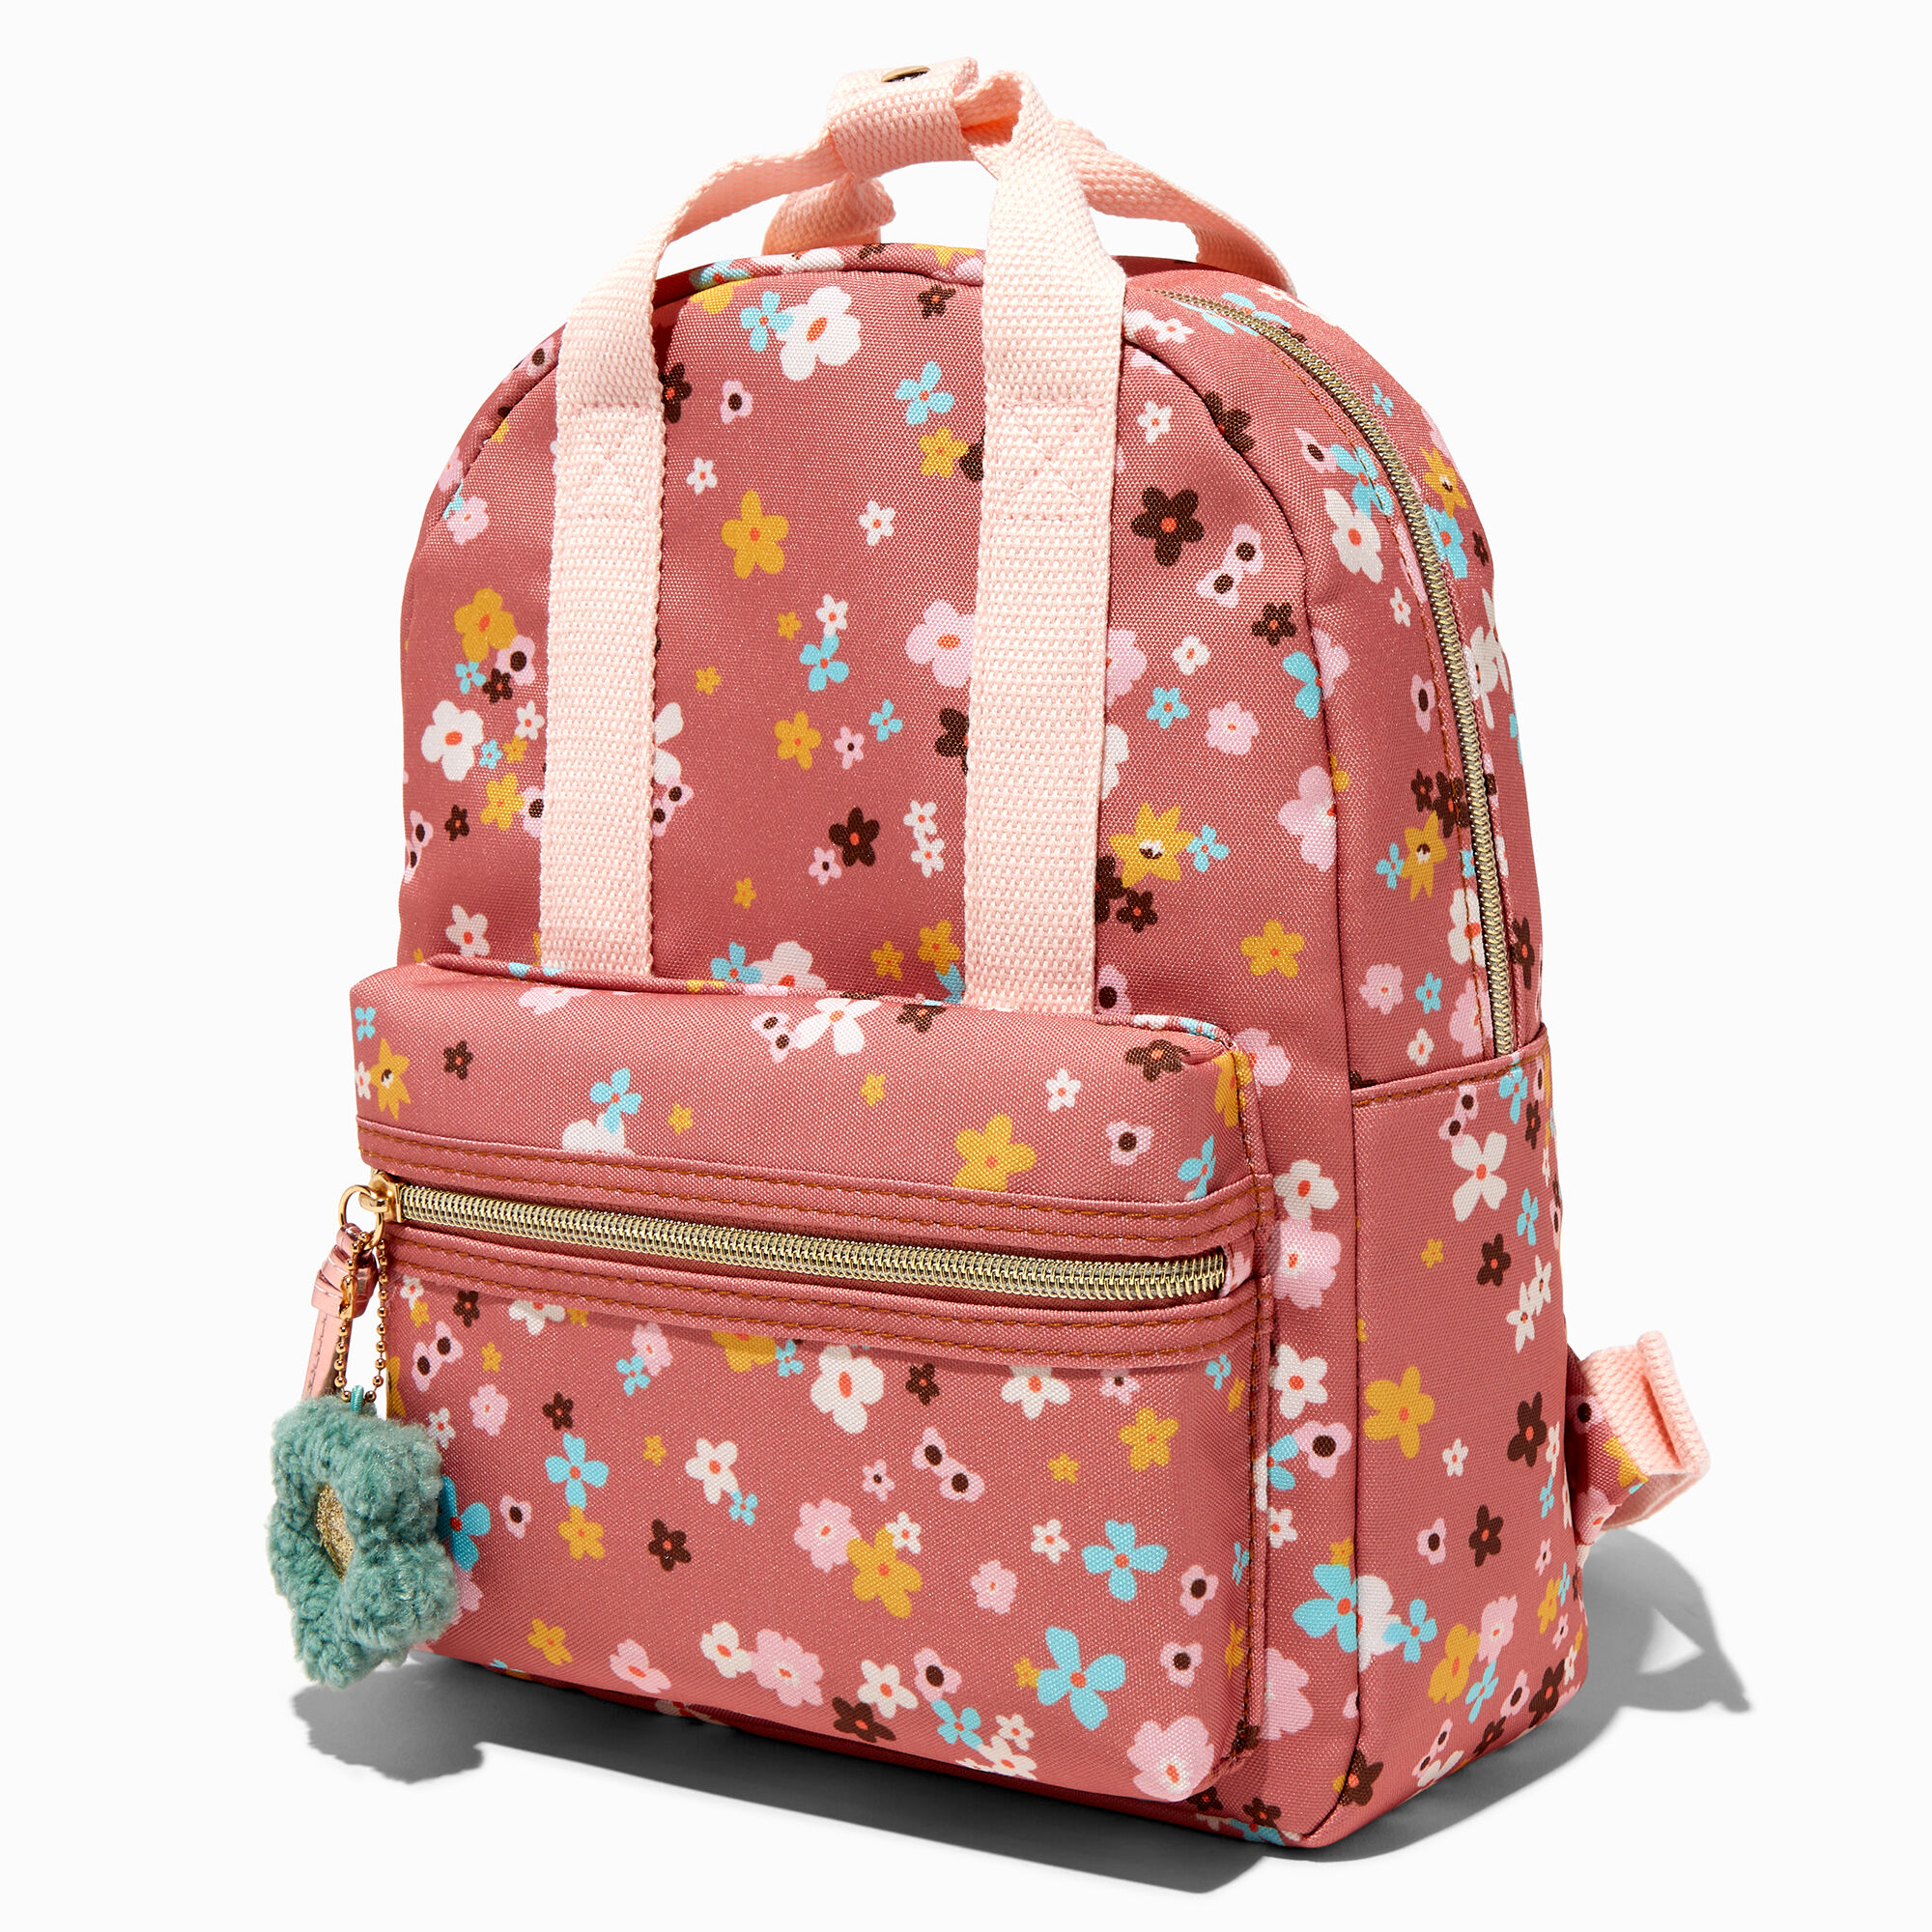 View Claires Club Woodland Floral Backpack information